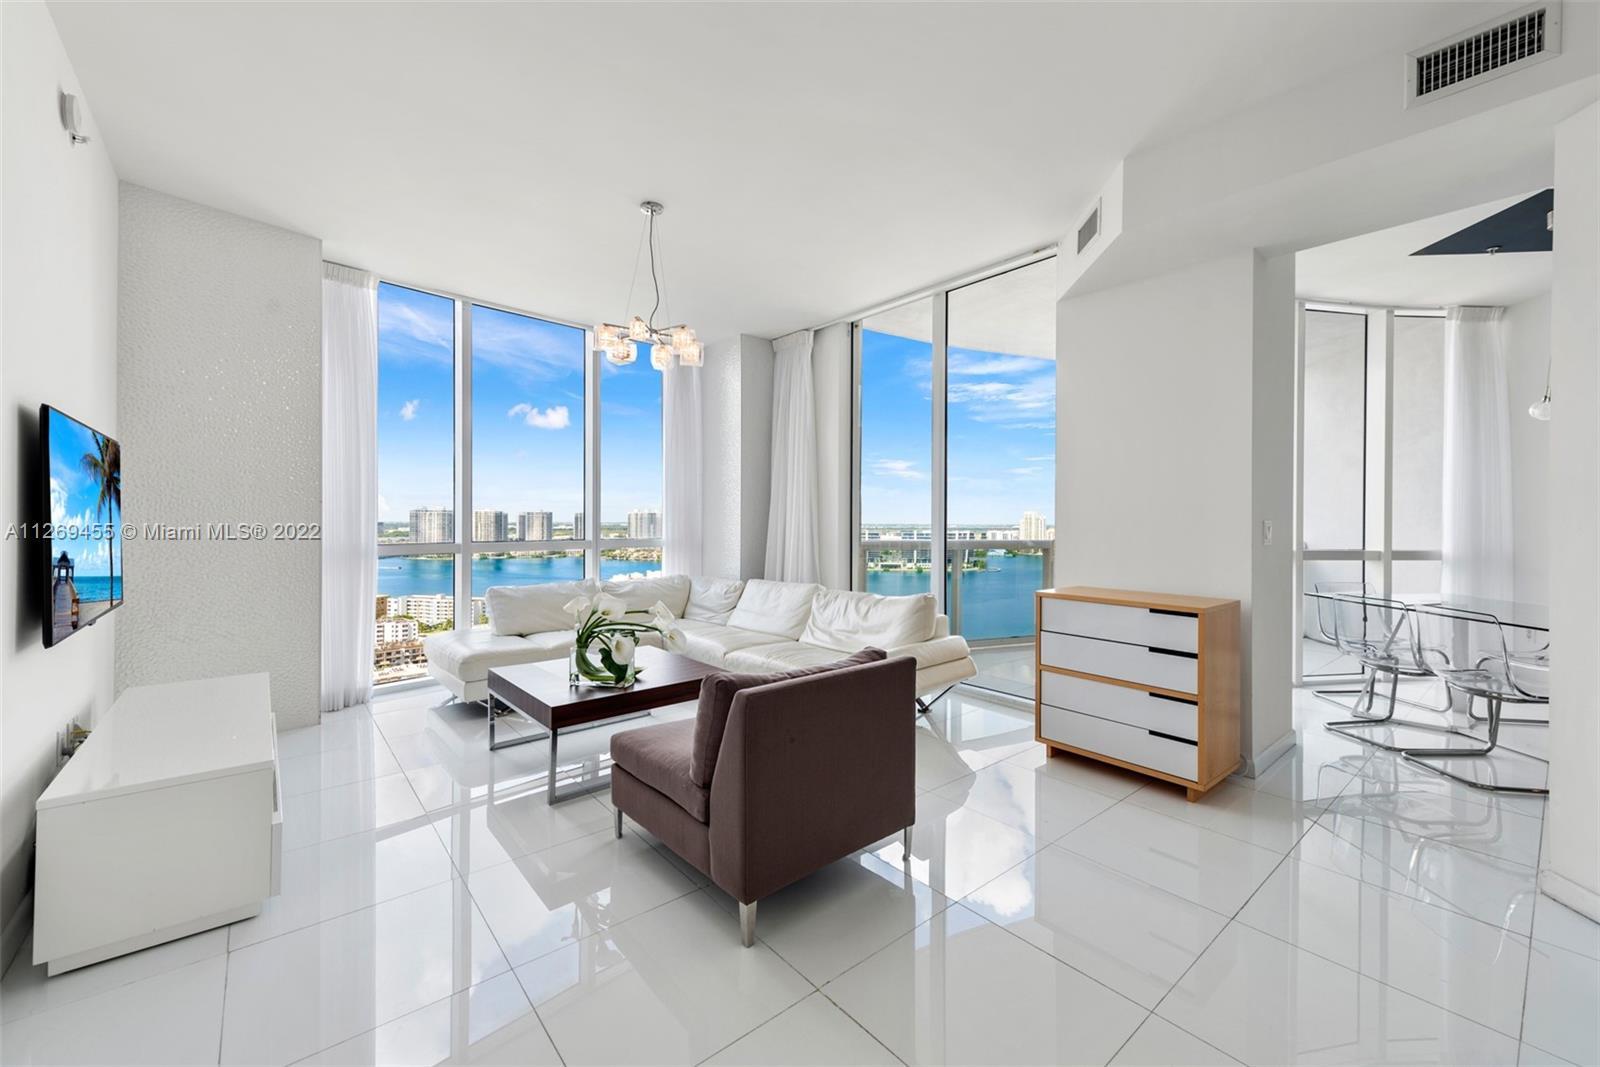 Enjoy the finest that Sunny Isles has to offer in this spacious corner
unit at Trump Royale. Experi